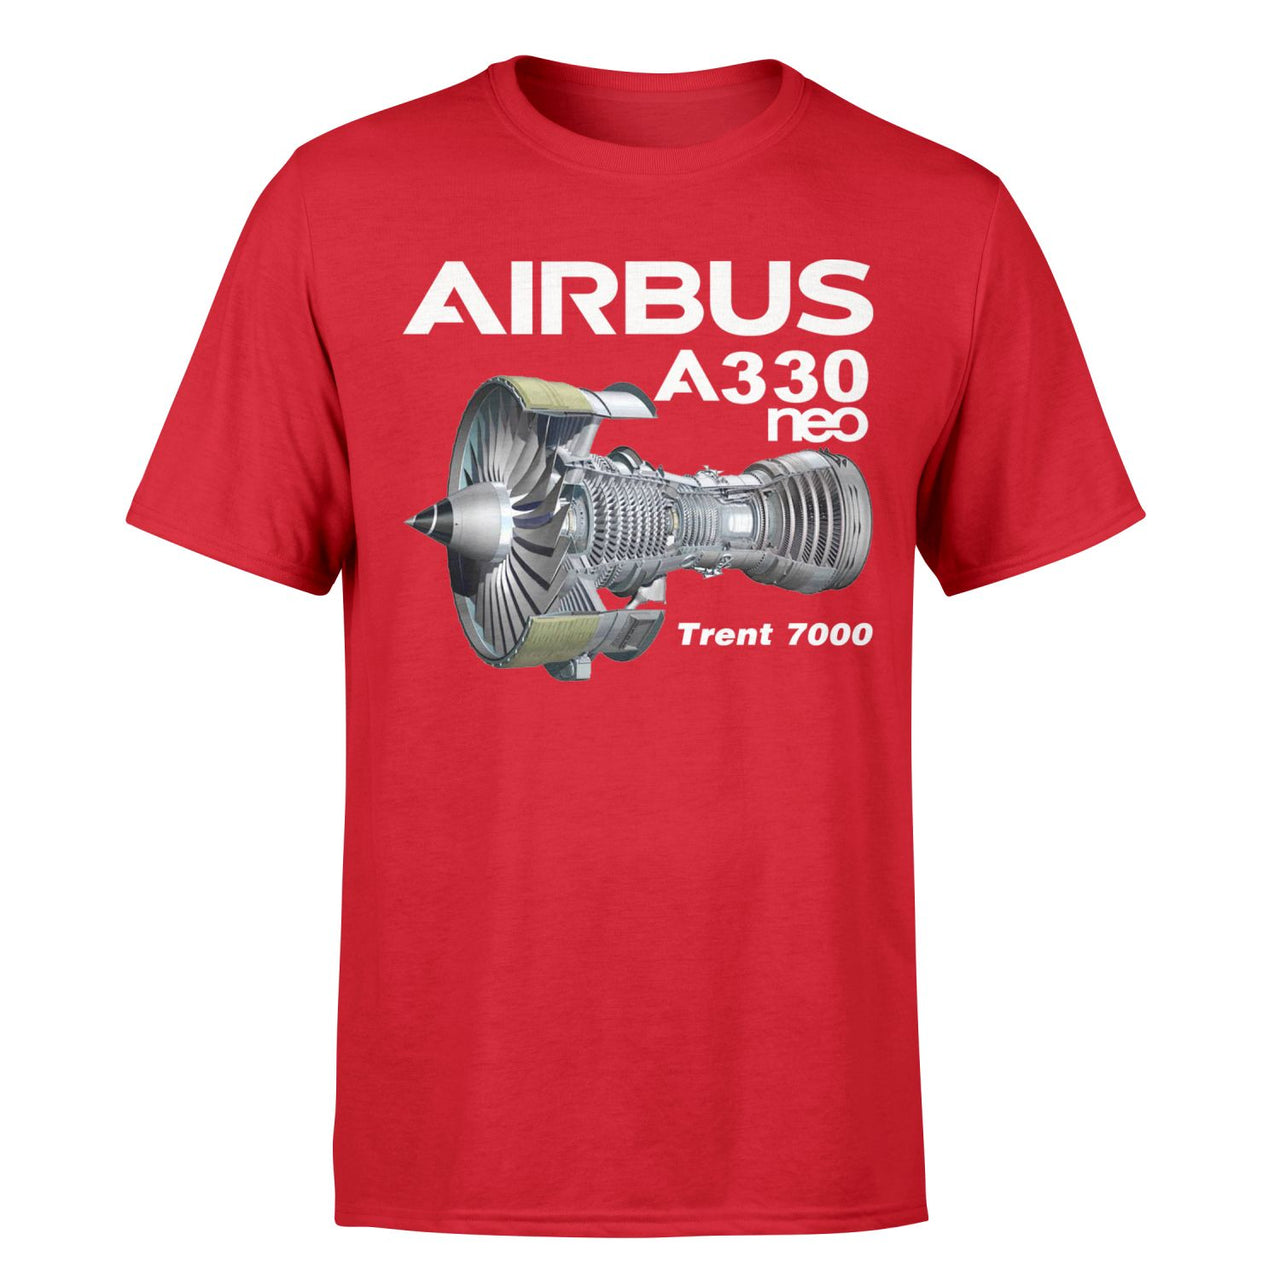 Airbus A330neo & Trent 7000 Designed T-Shirts